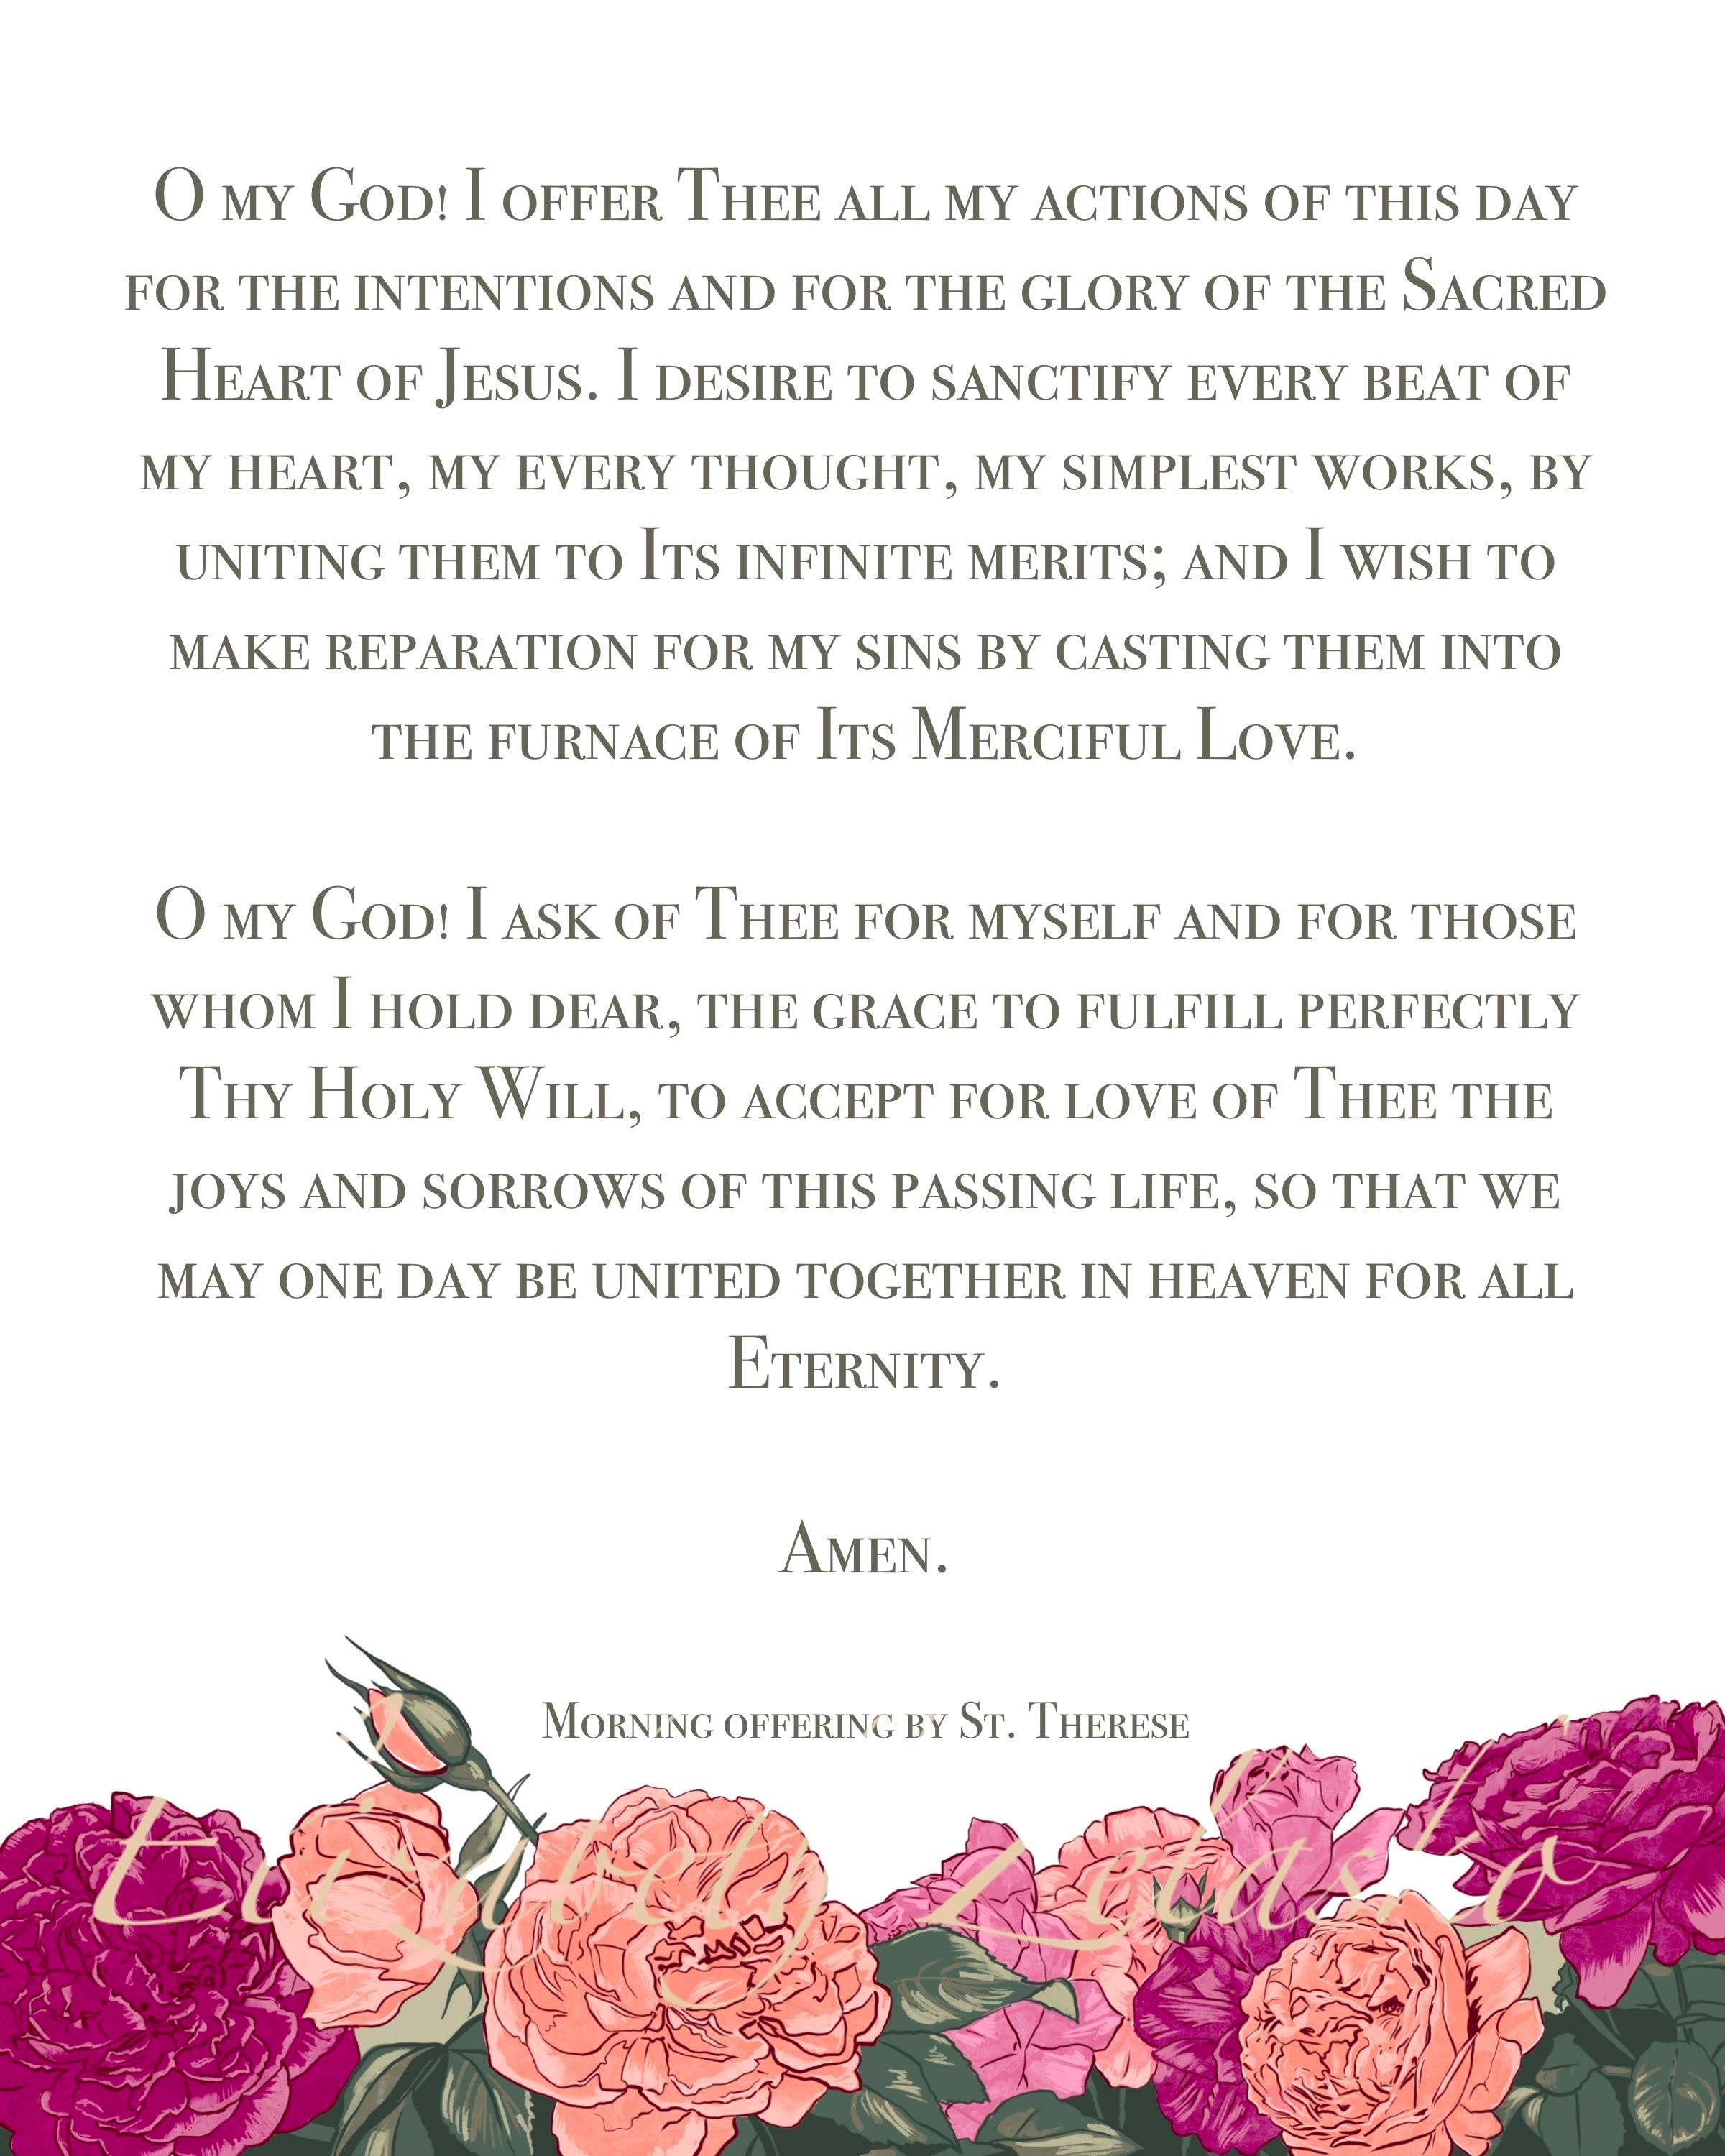 Morning Offering written by Saint Therese the Little Flower